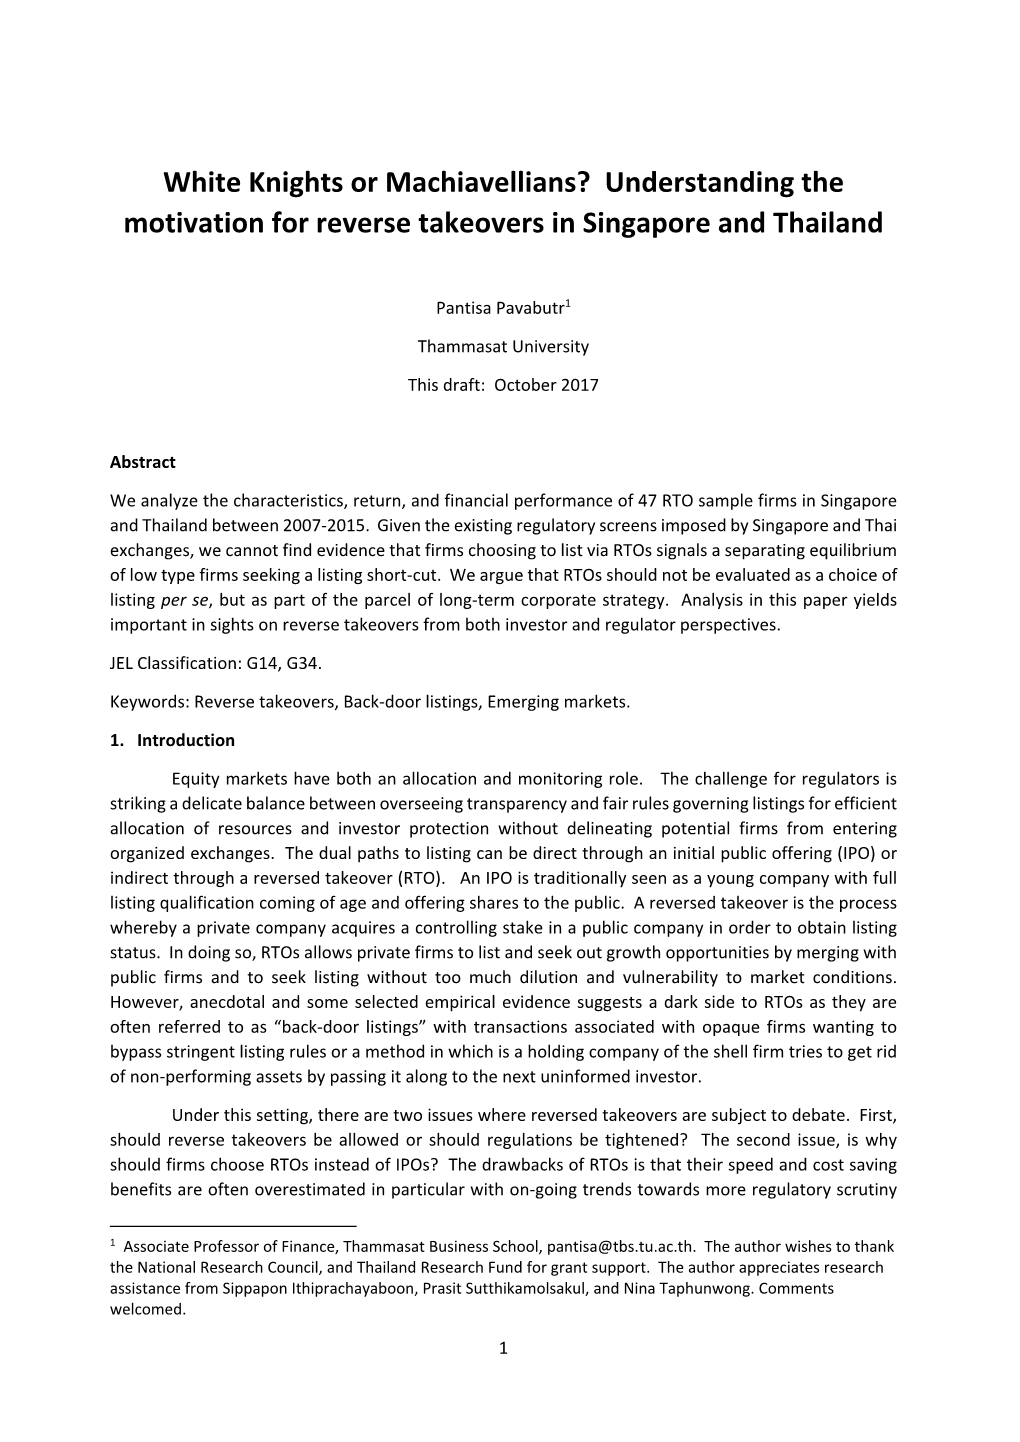 White Knights Or Machiavellians? Understanding the Motivation for Reverse Takeovers in Singapore and Thailand